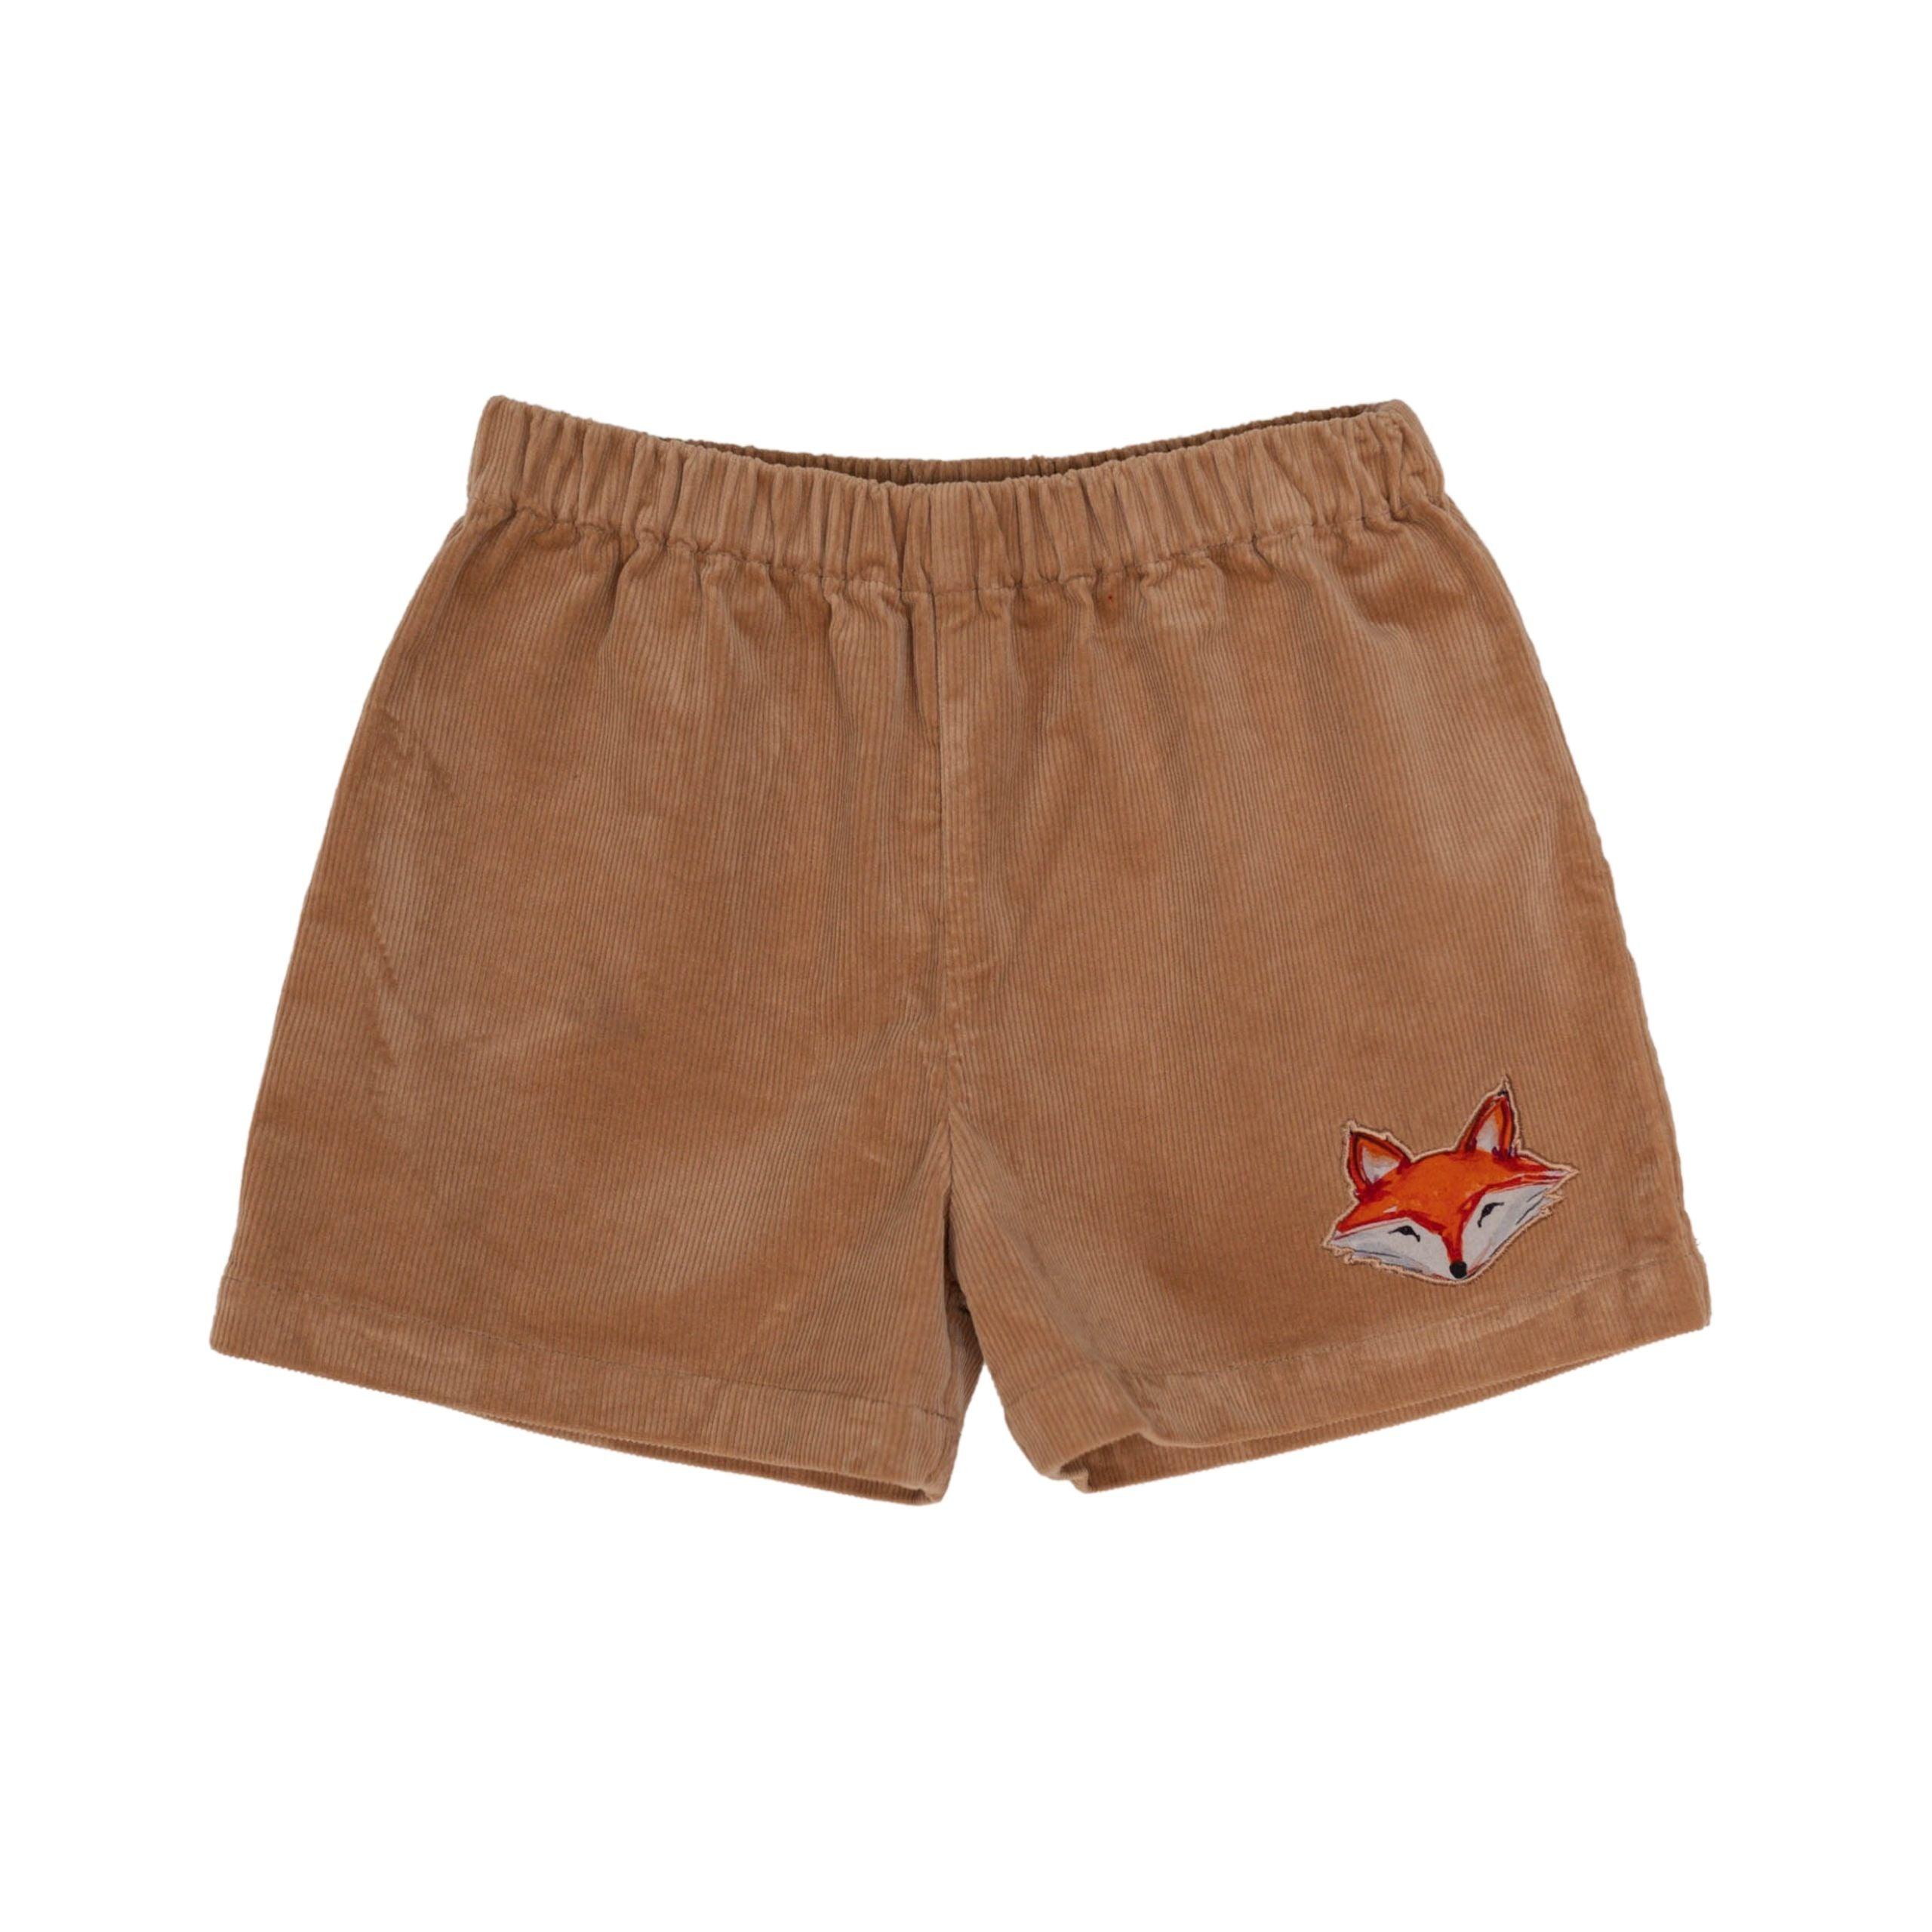 Liam Shorts in Clubhouse Camel Corduroy with Charlie Fox Applique